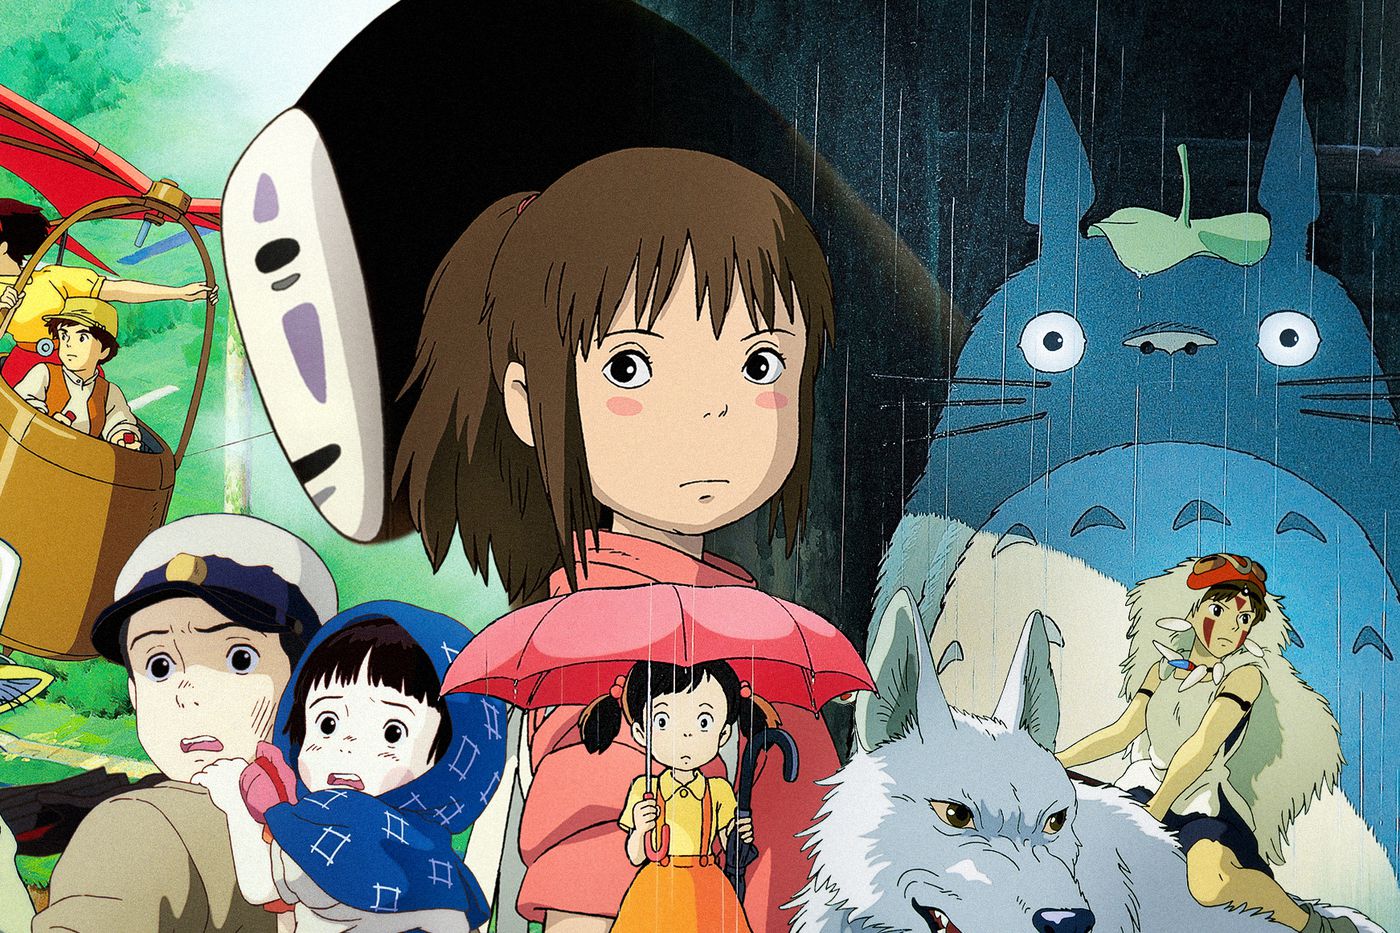 Brave, tenacious, and larger-than-life: Studio Ghibli’s female leads